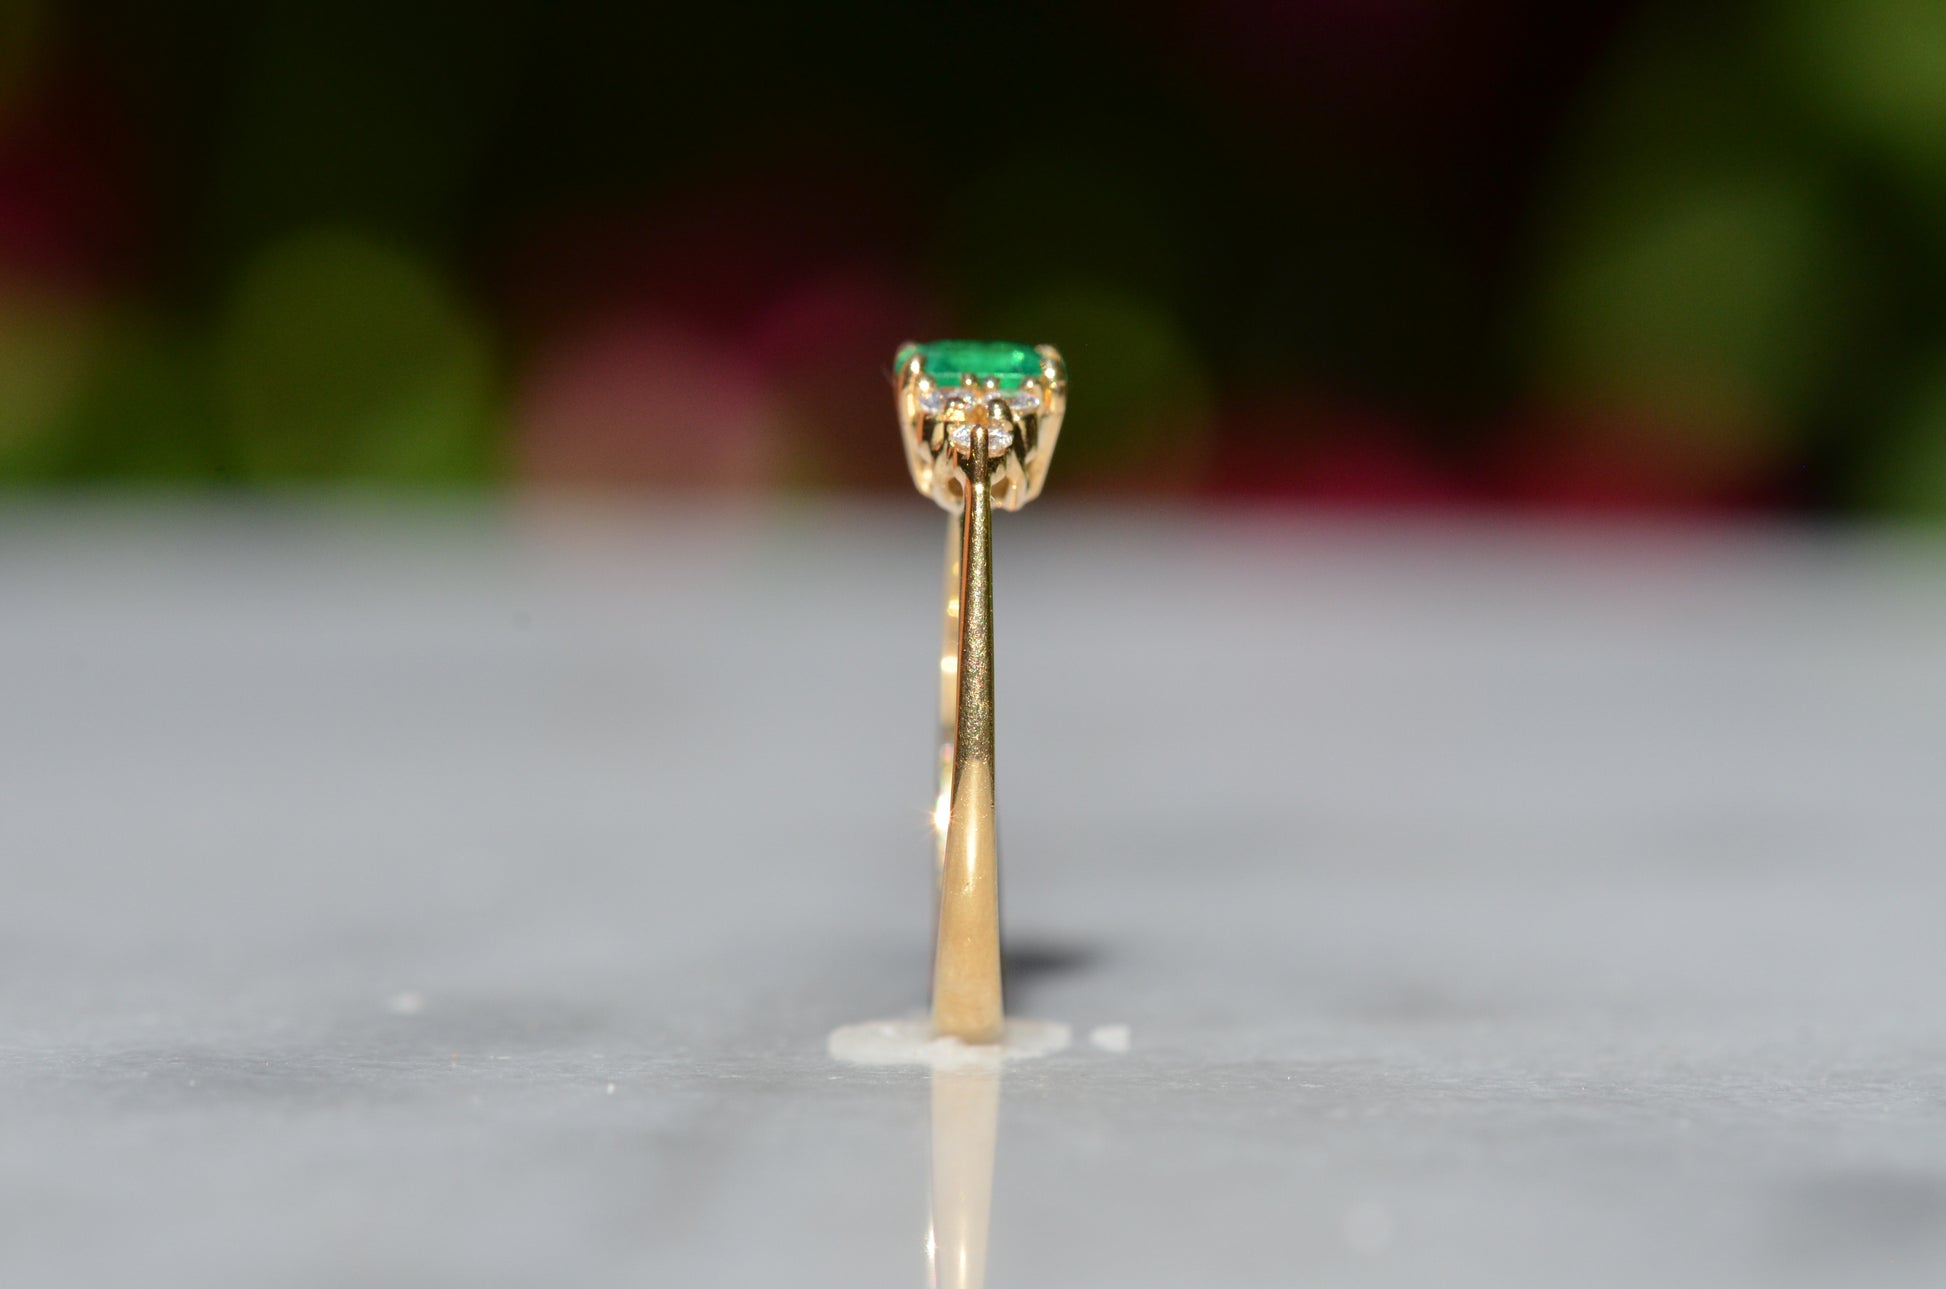 Close-cropped macro of a vintage ring, featuring a square emerald-cut emerald flanked by three round diamonds arranged in a triangular cluster on each shoulder. Viewed upright and from the side to highlight the profile.